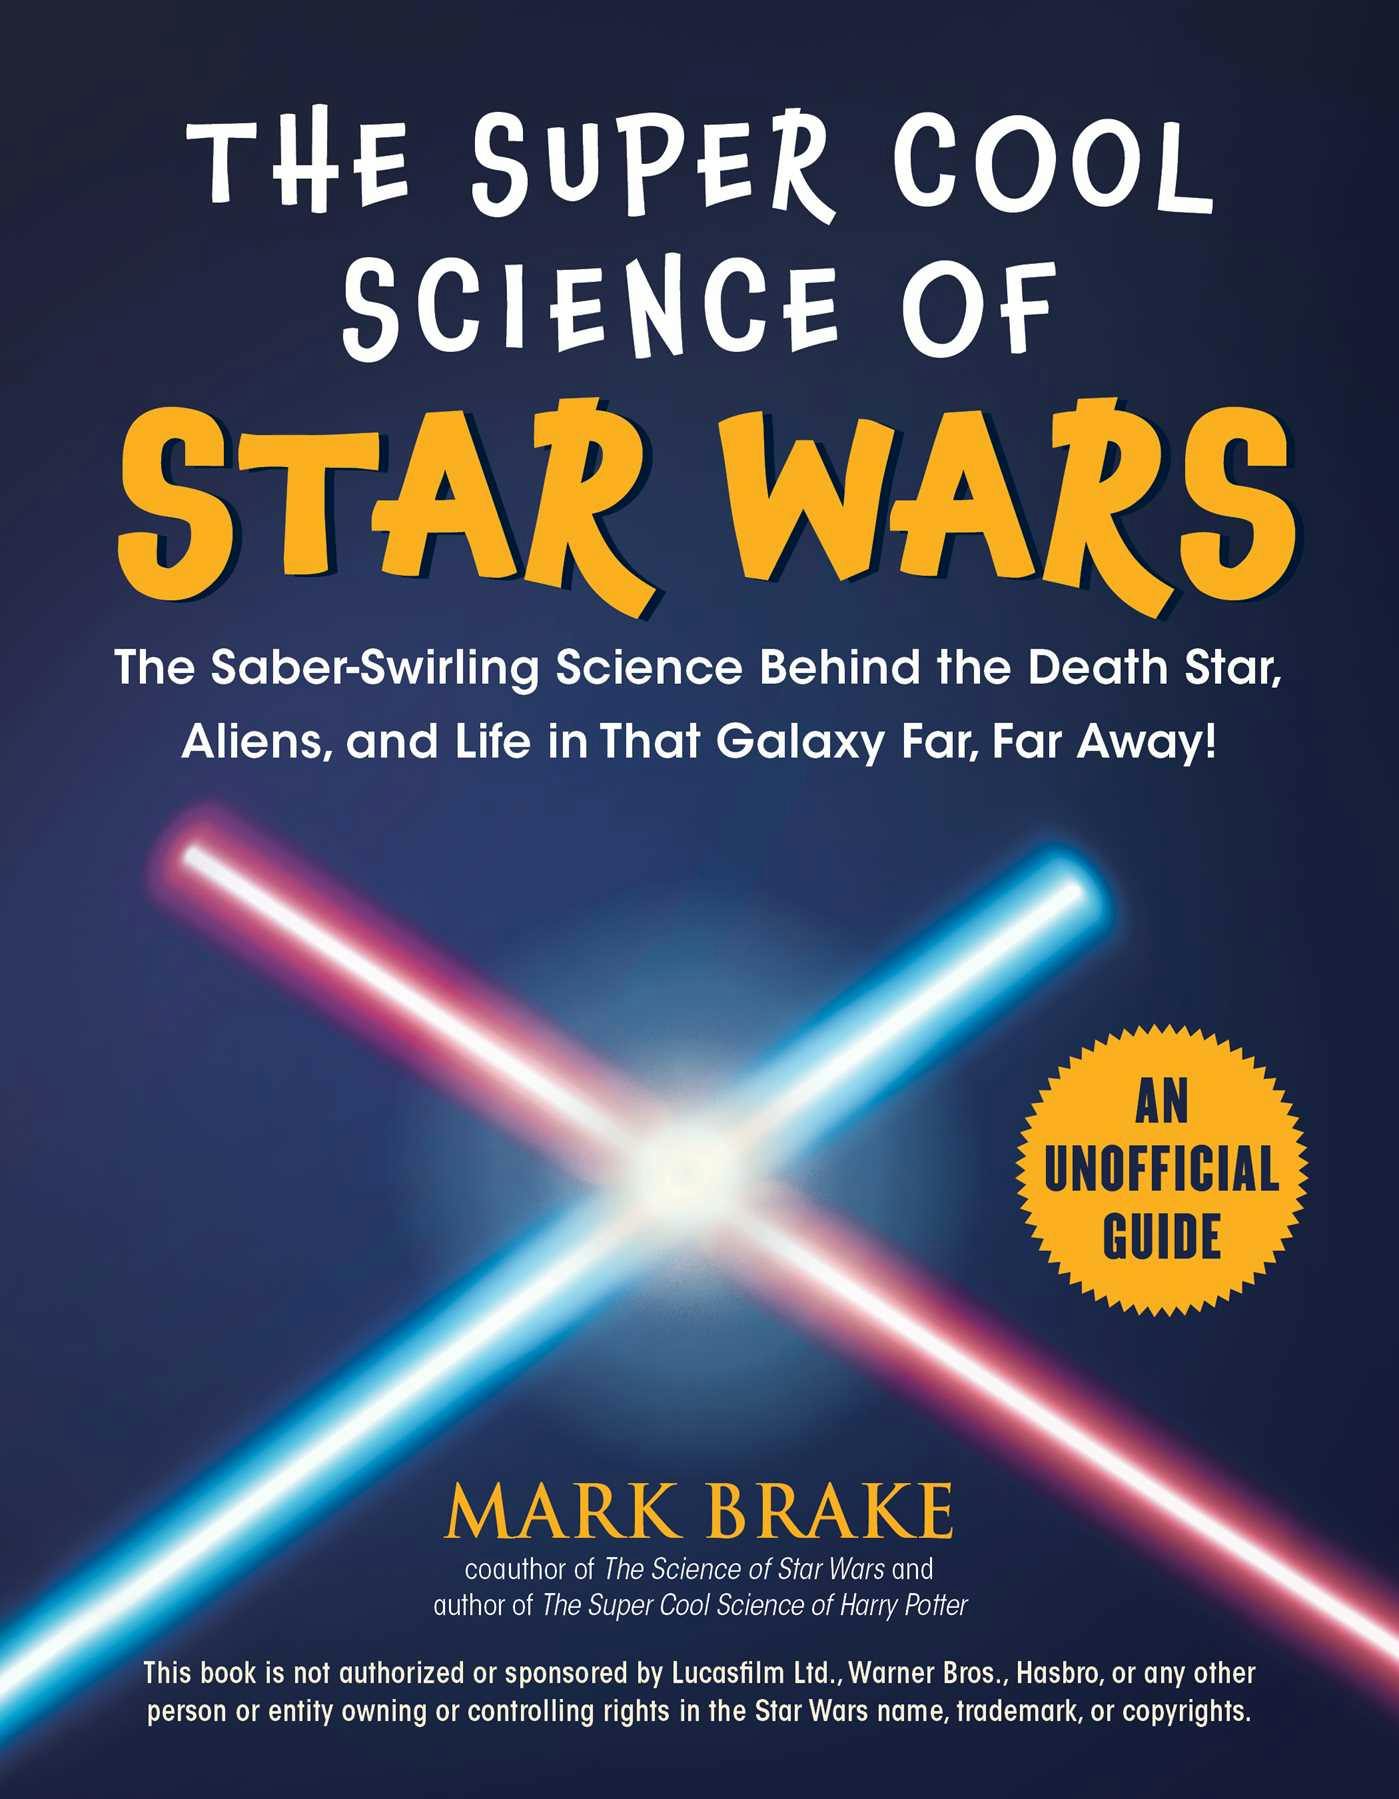 The Super Cool Science of Star Wars: The Saber-Swirling Science Behind the Death Star, Aliens, and Life in That Galaxy Far, Far Away! - Mark Brake